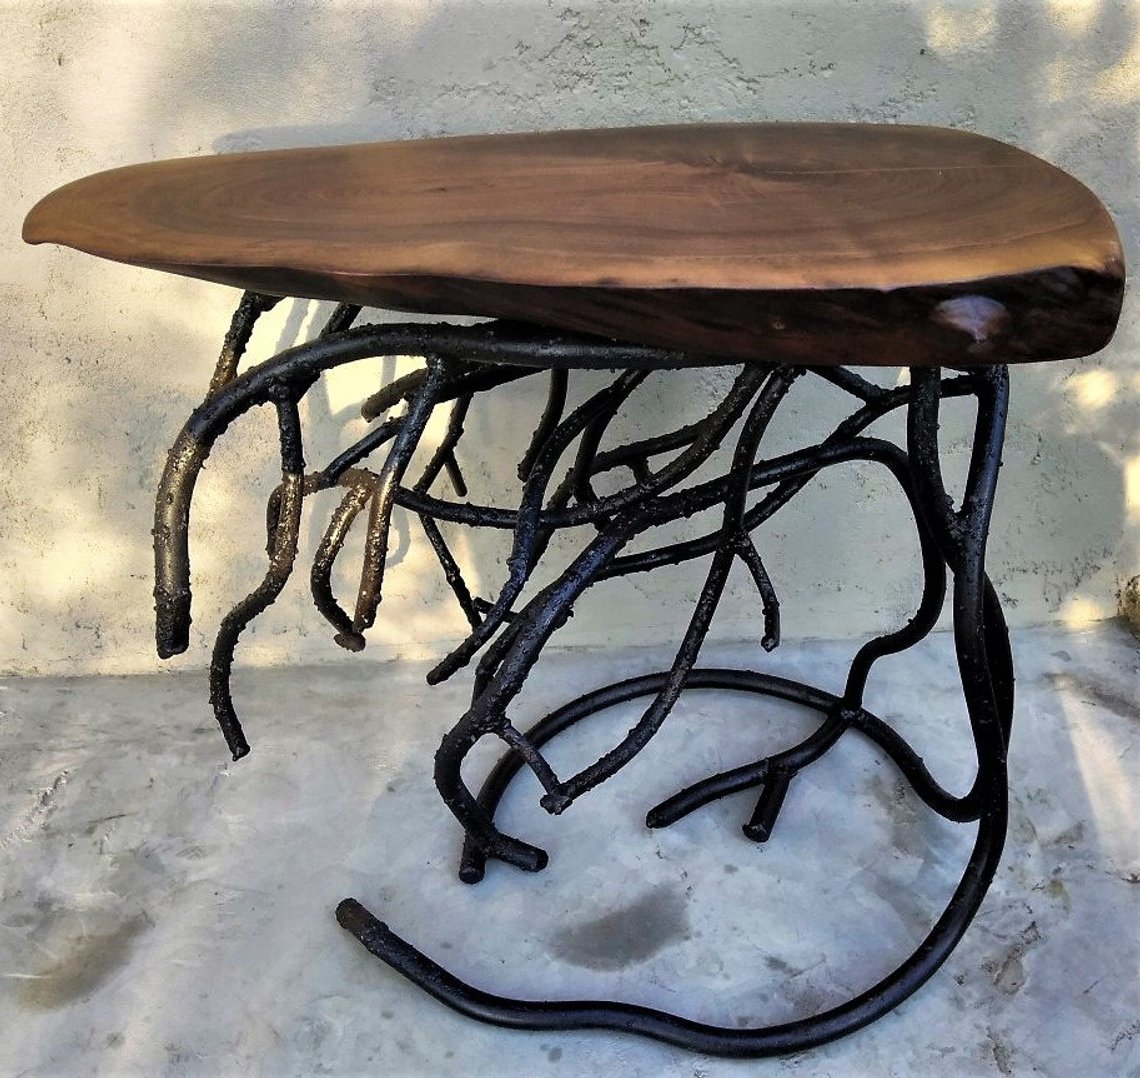 forged root metal table base and live edge black walnut wood etsy kyfy accent garden umbrella end tables target small occasional living room west elm rocking chair cordless